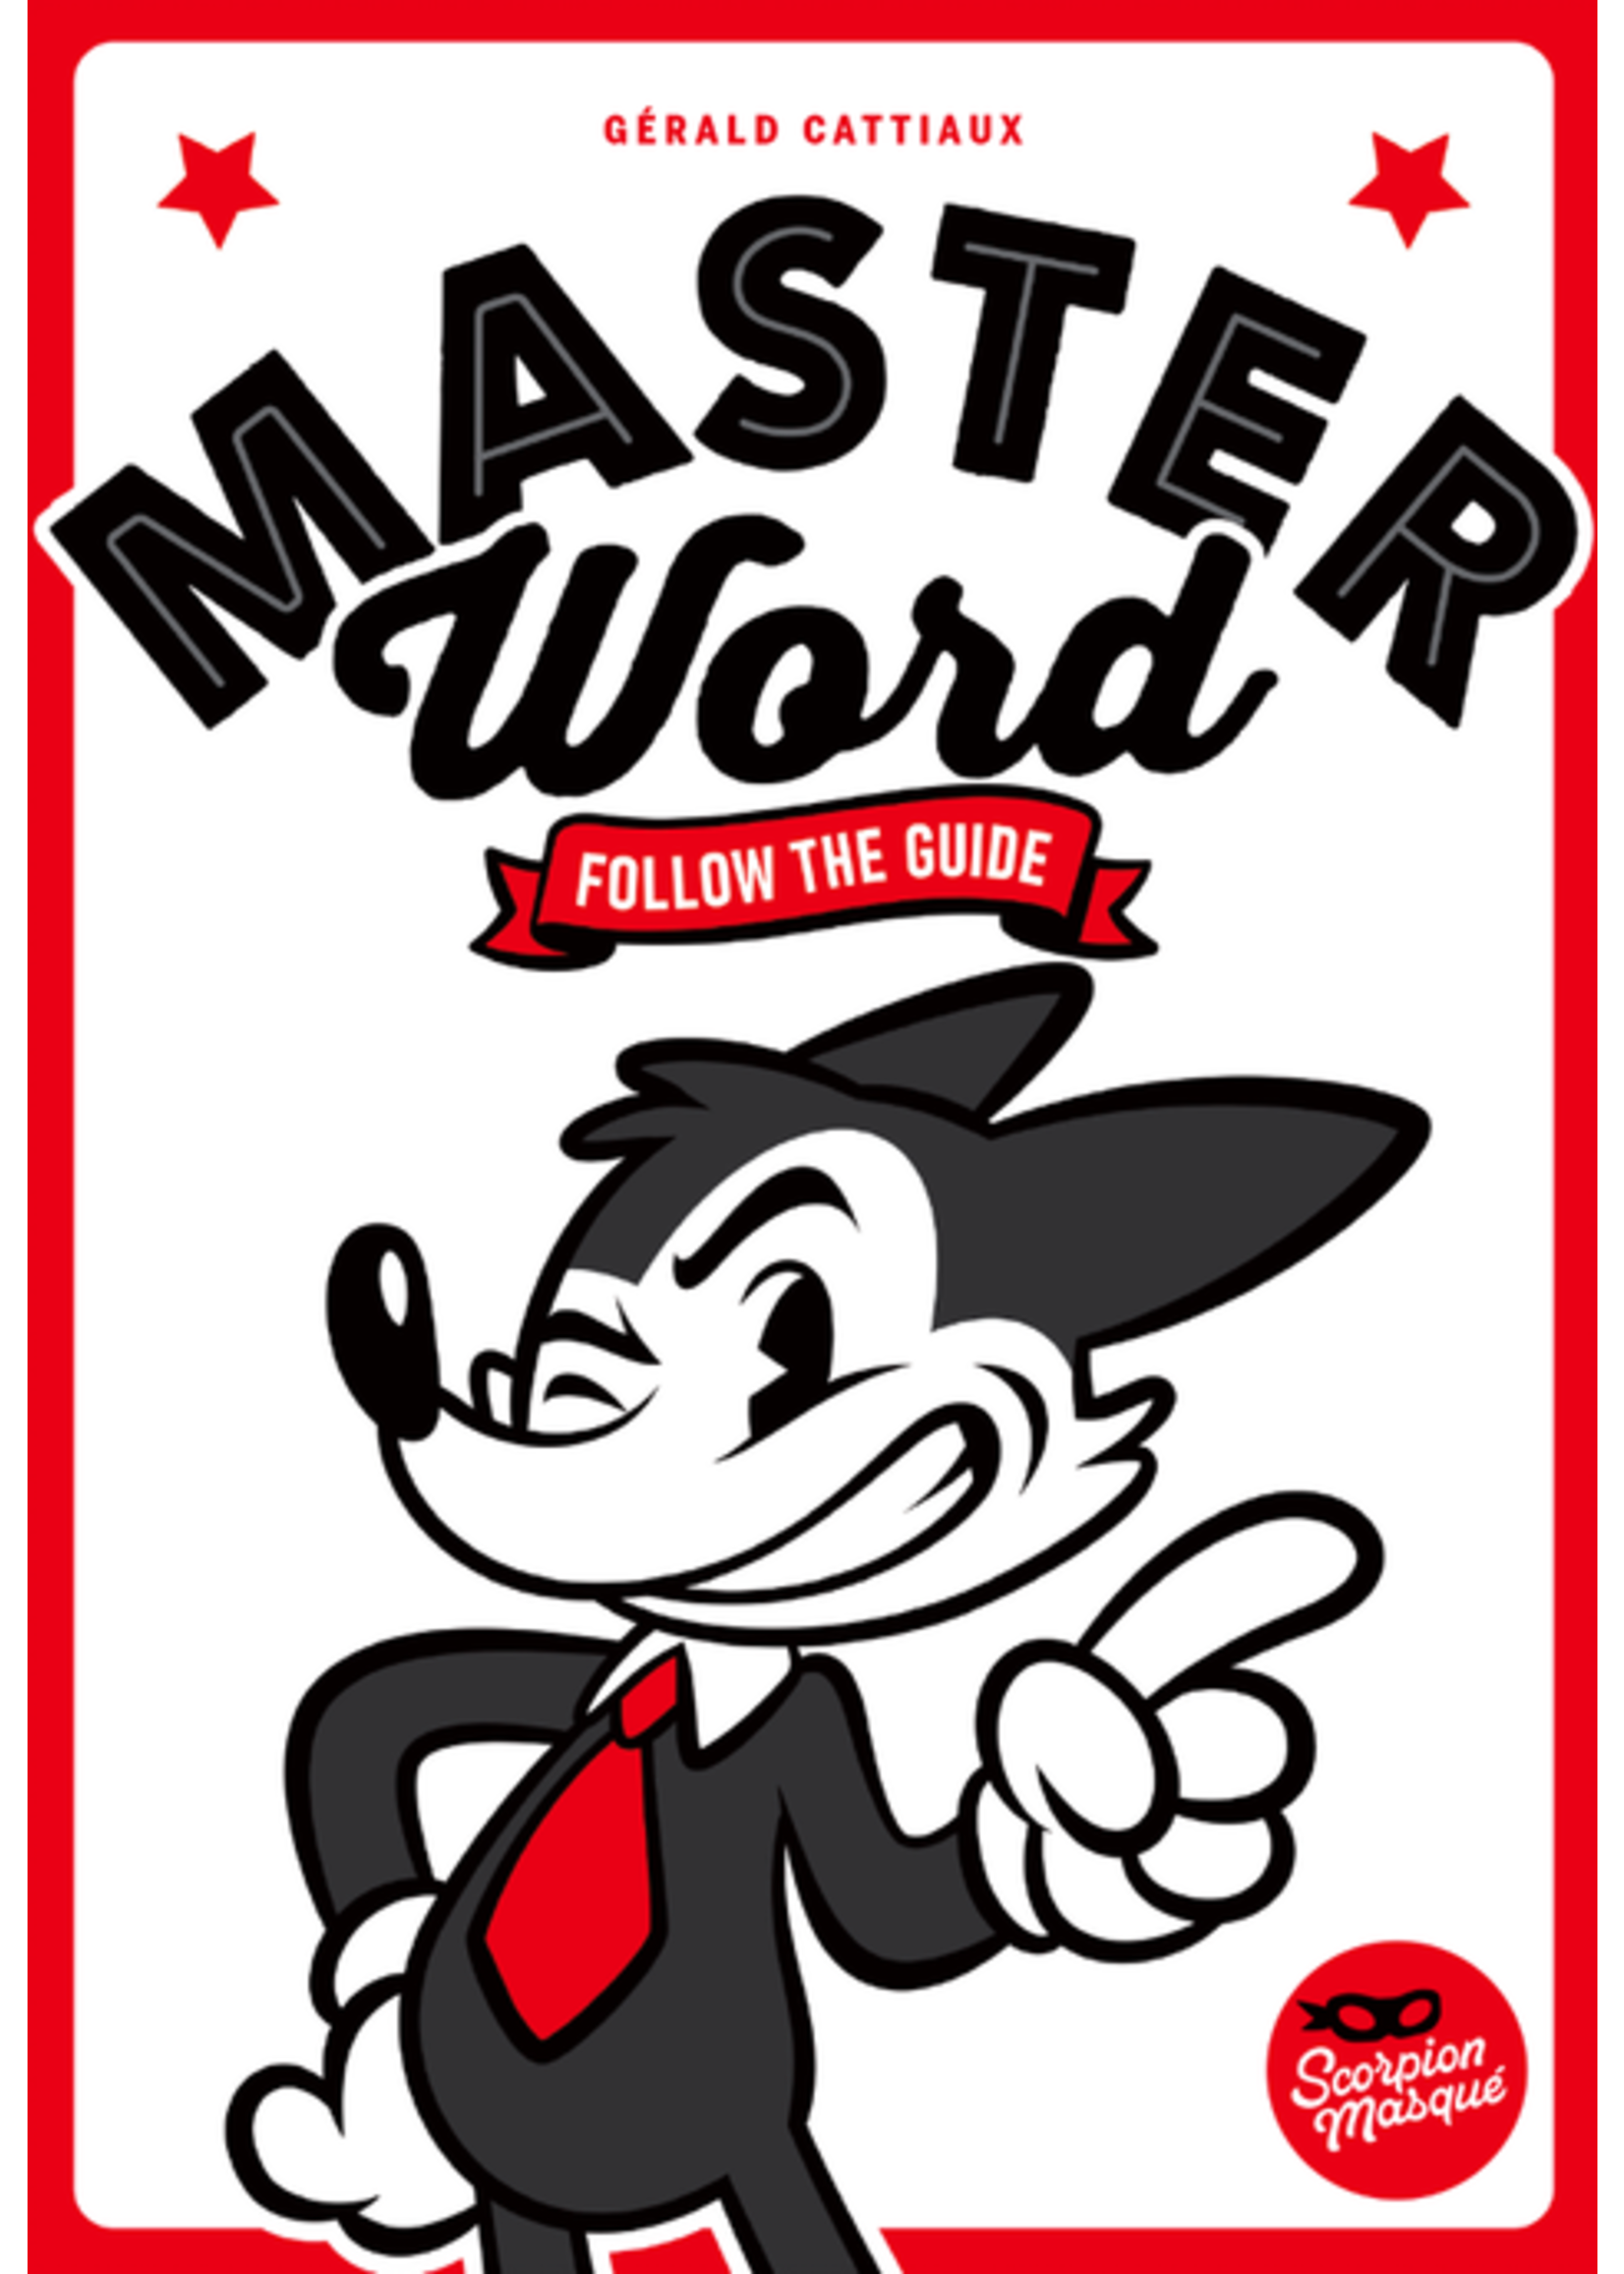 Gigamic Master Word Follow the Guide